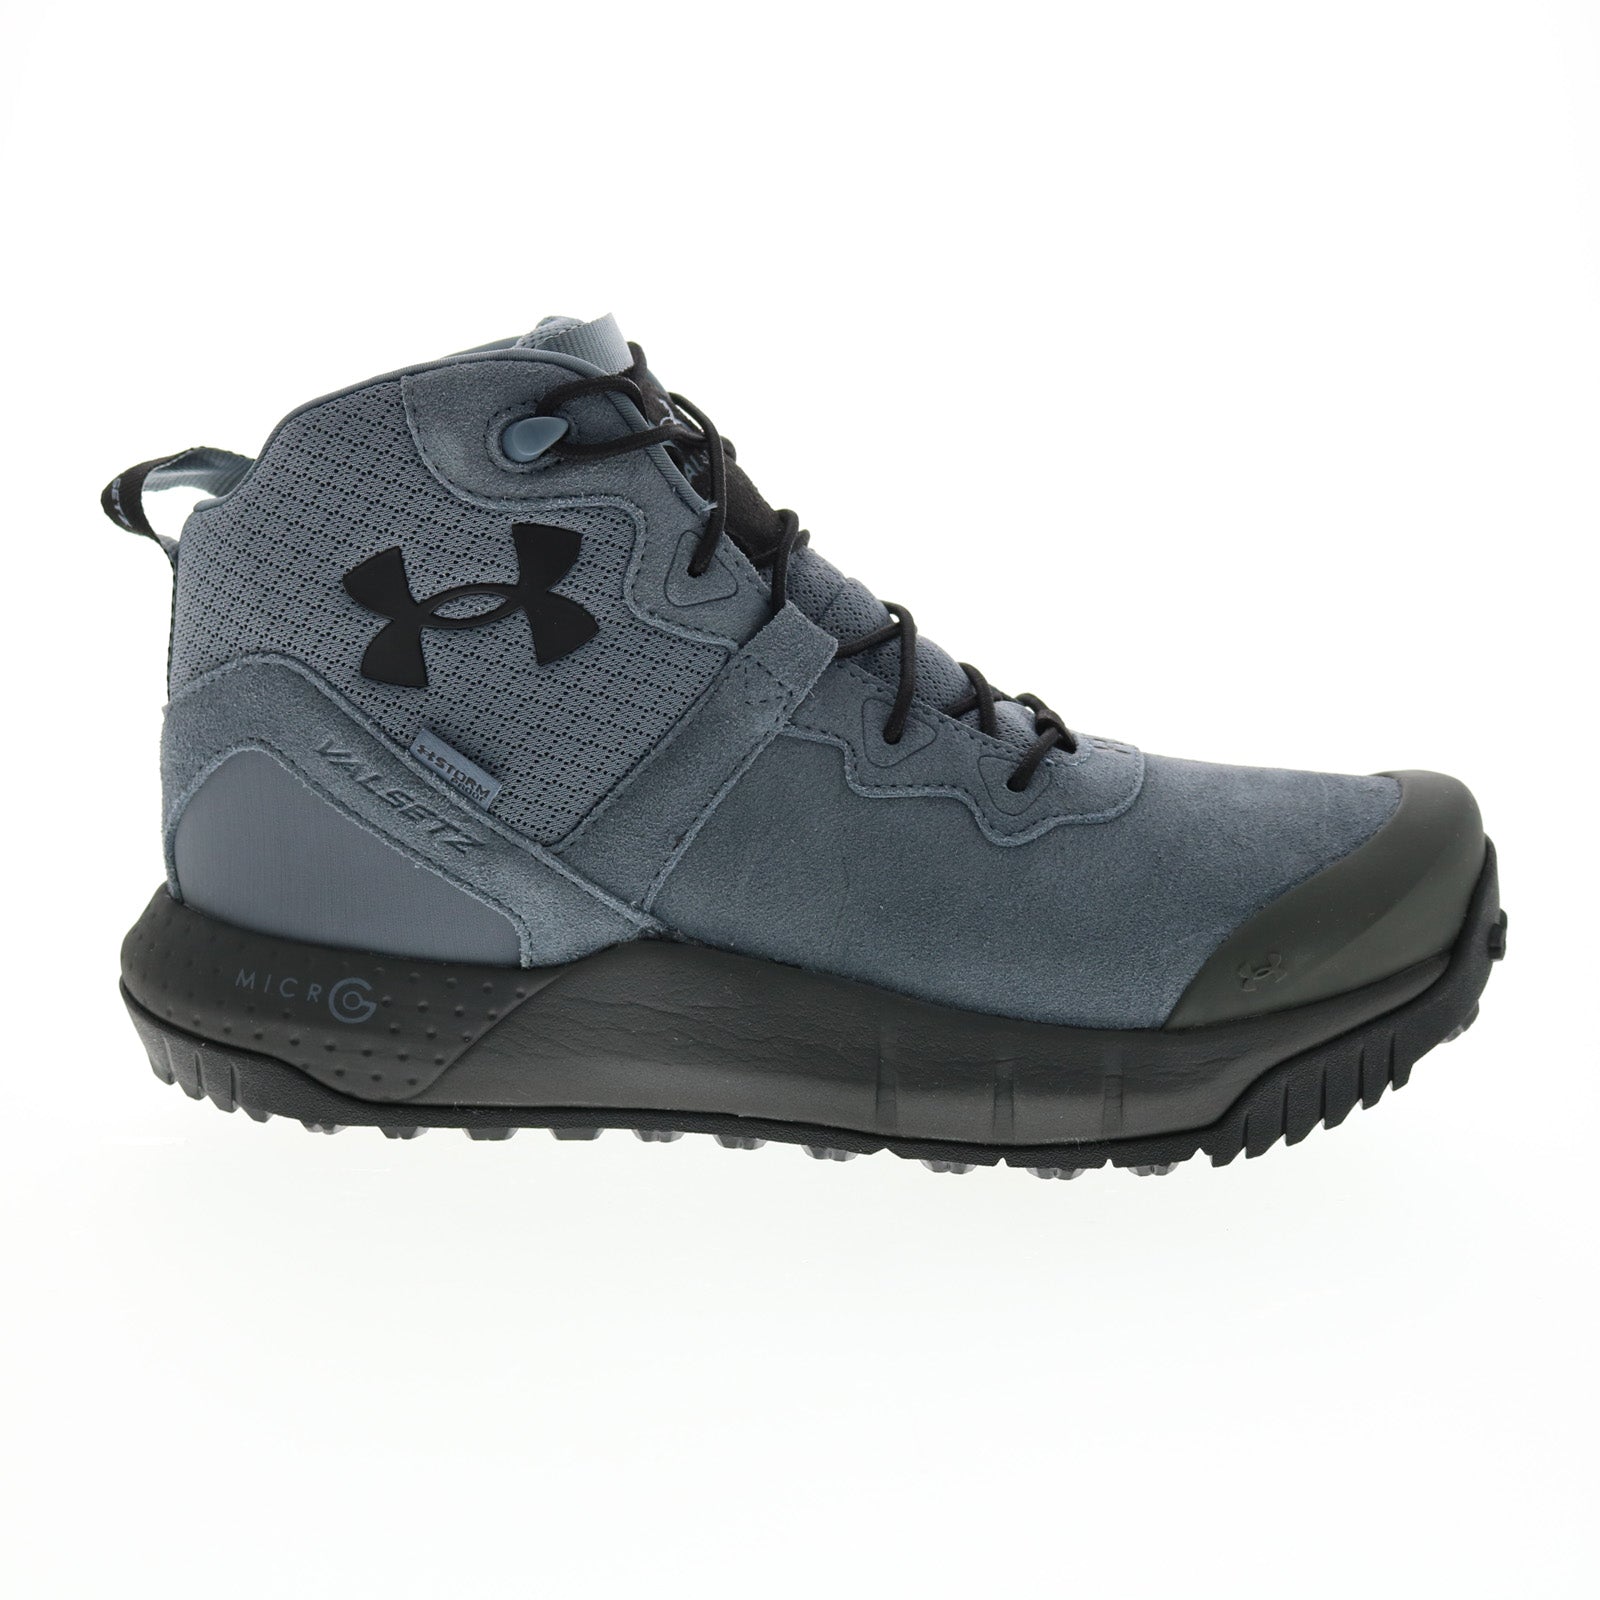 Under Armour MG Valsetz Mid Leather 3024334-101 Mens Gray Tactical